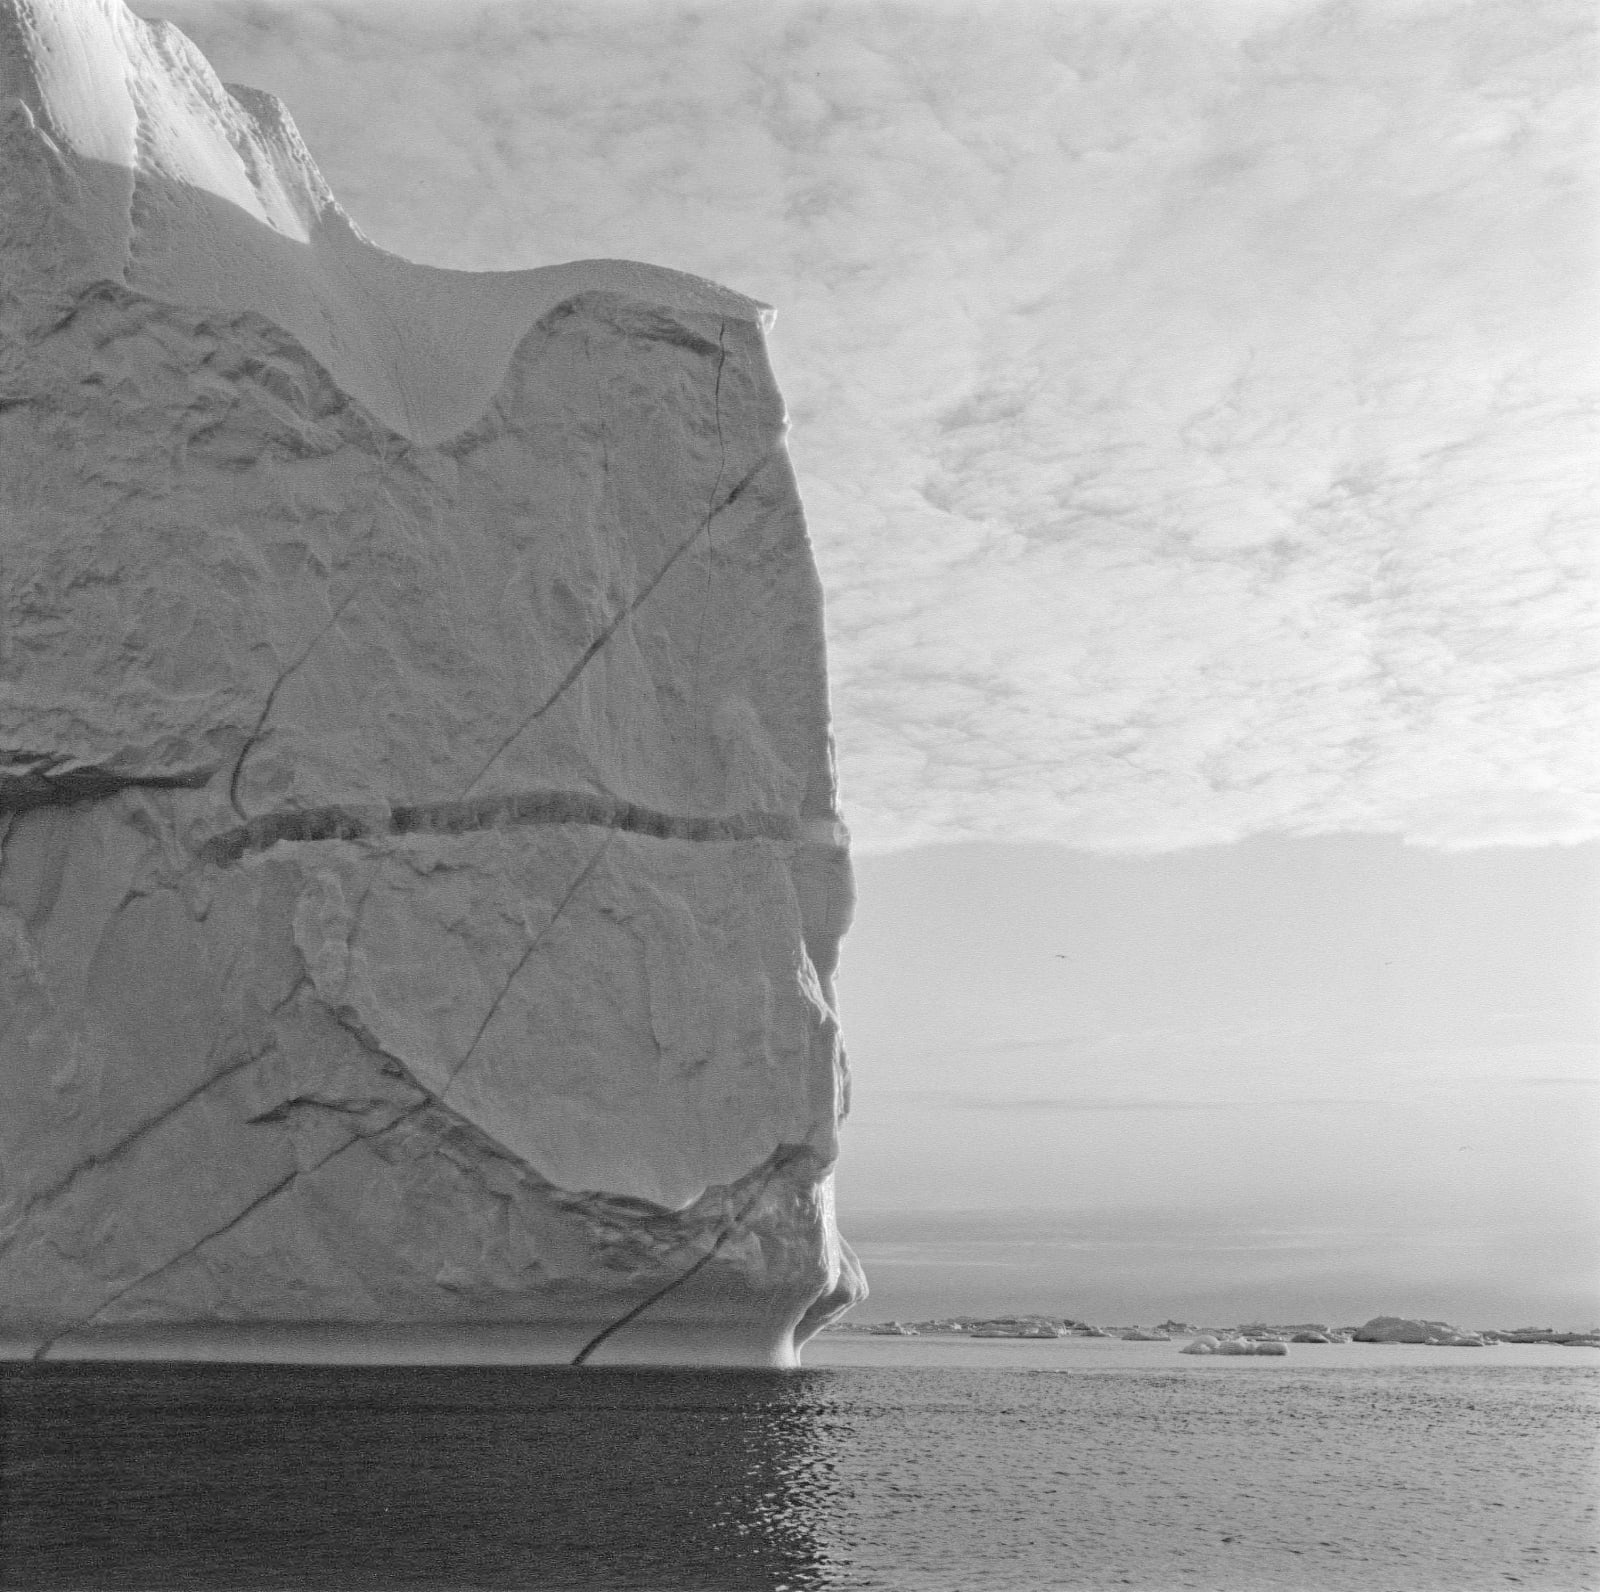 Lynn Davis photograph of iceberg in Disko Bay, Greenland, with horizontal cleft in alignment with clouds in sky